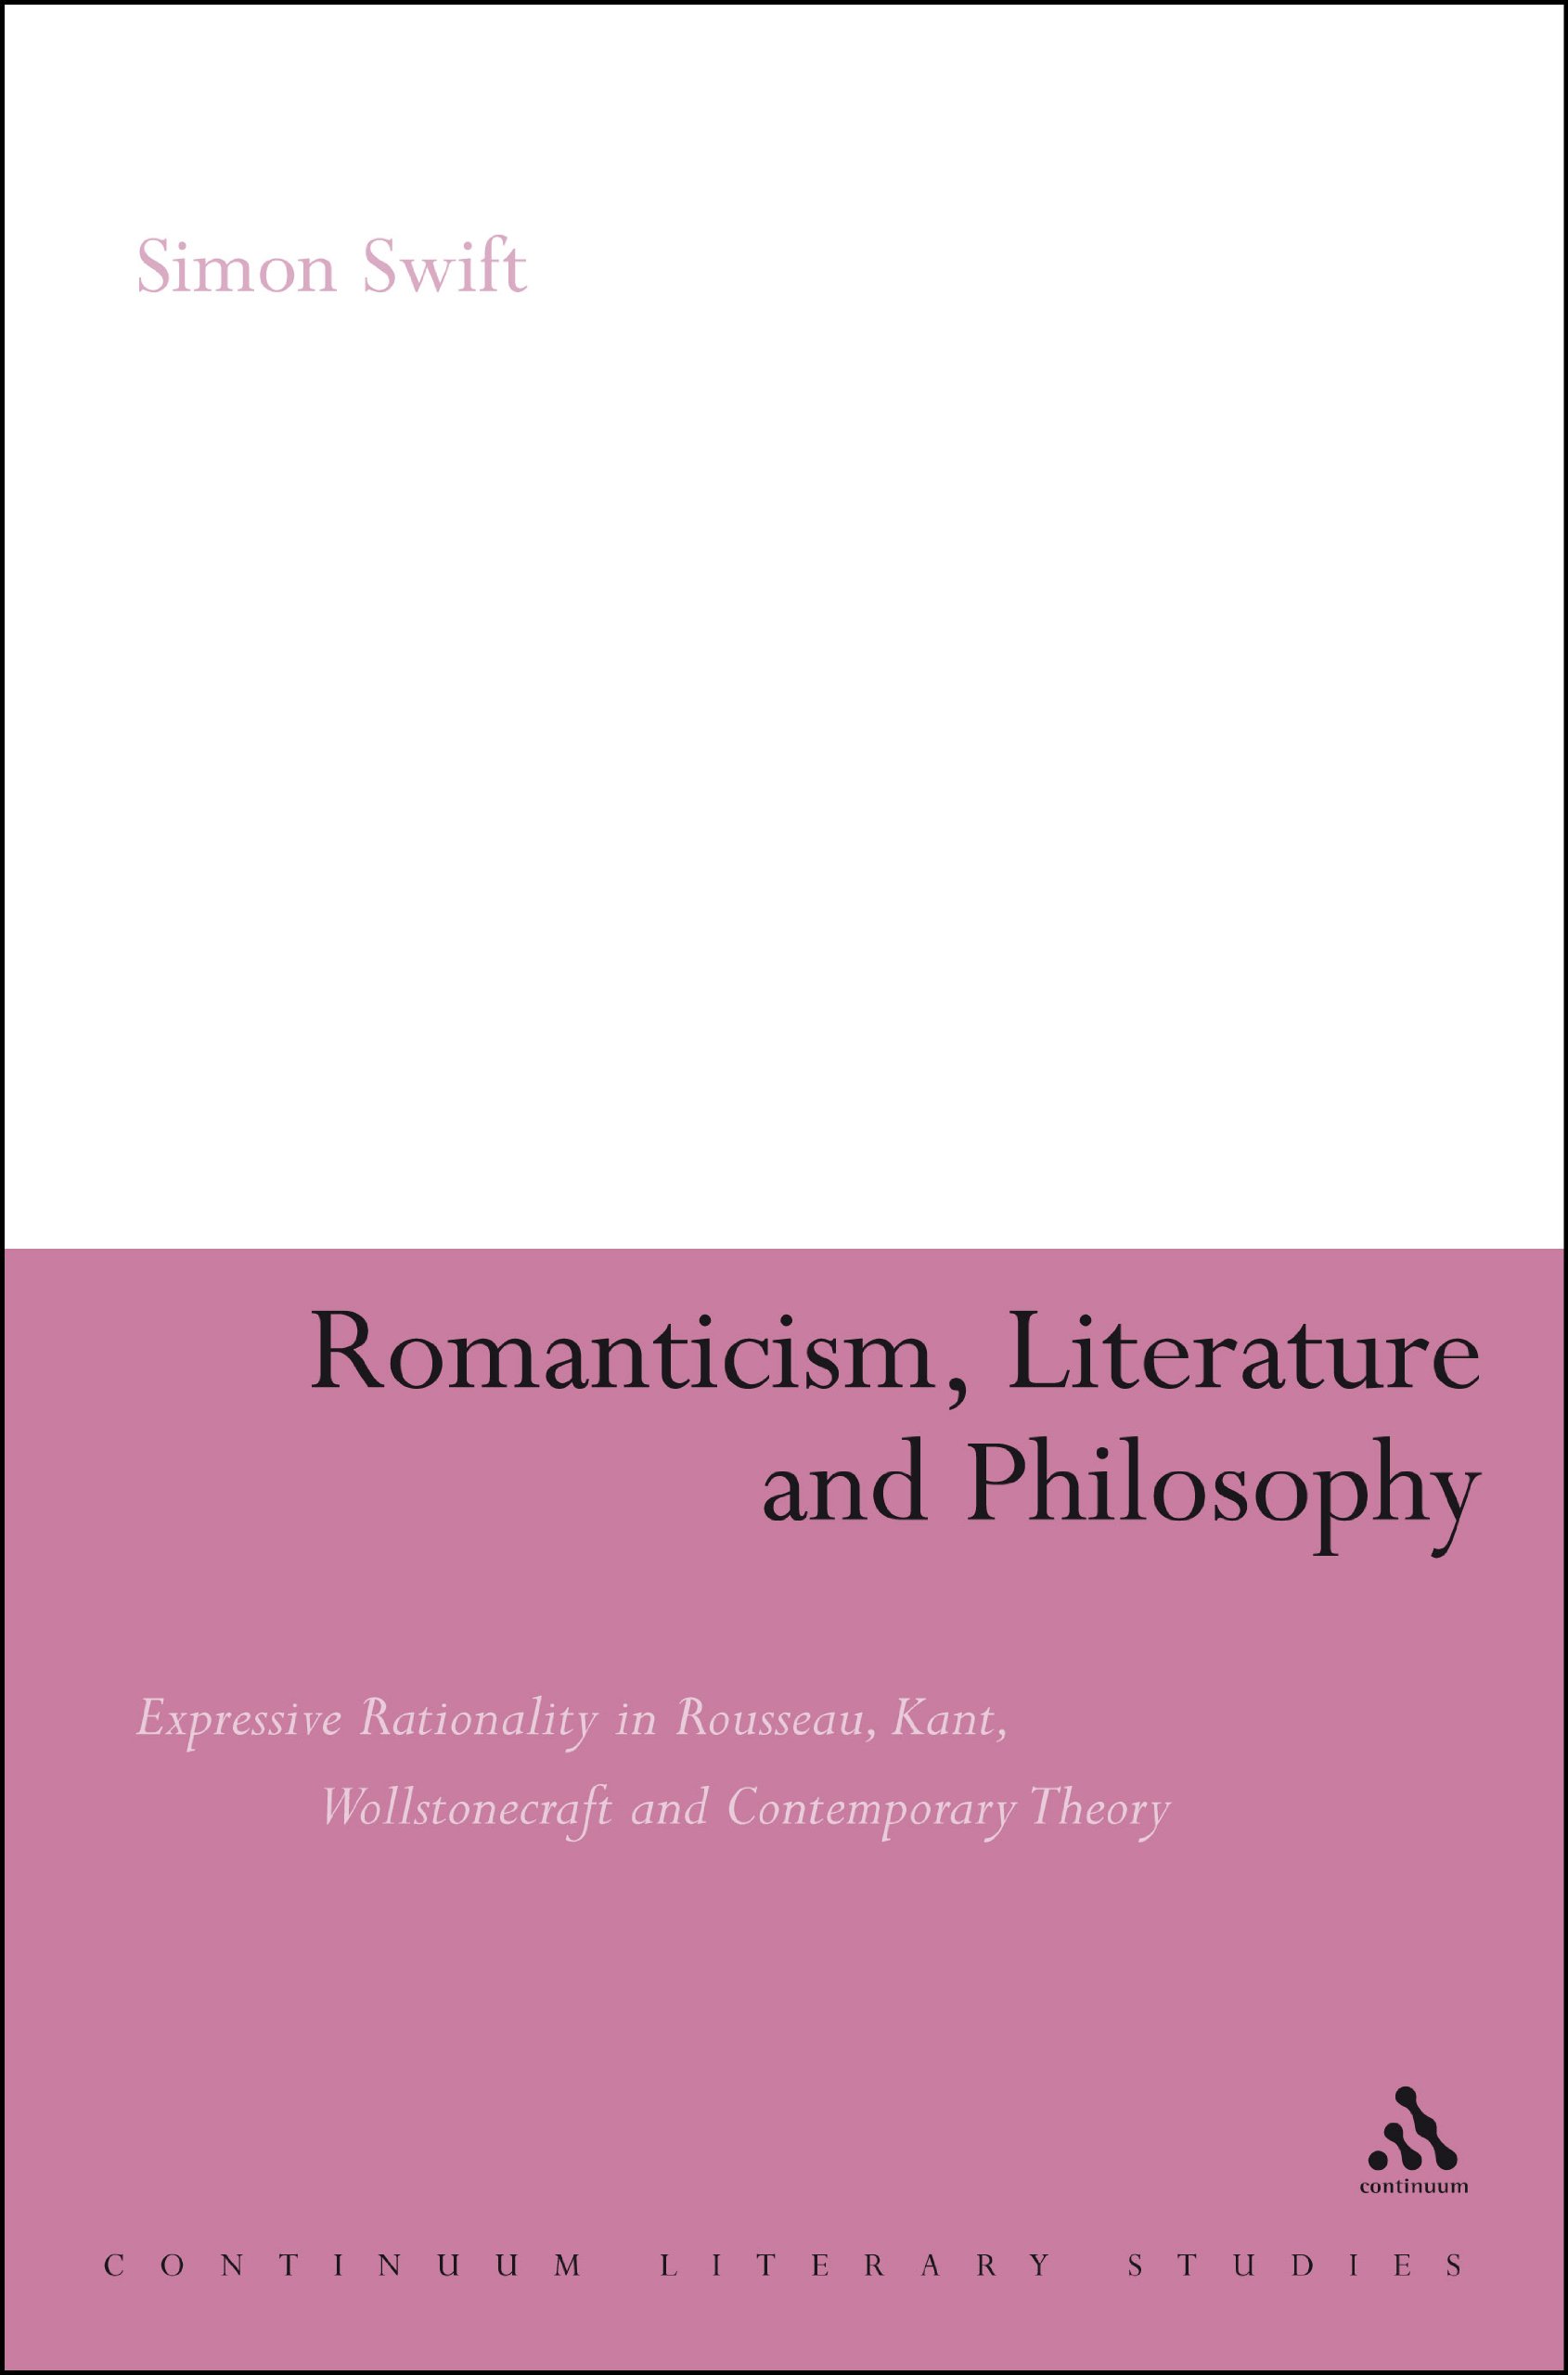  Romanticism, Literature and Philosophy: Expressive Rationality in Rousseau, Kant, Wollstonecraft and Contemporary Theory